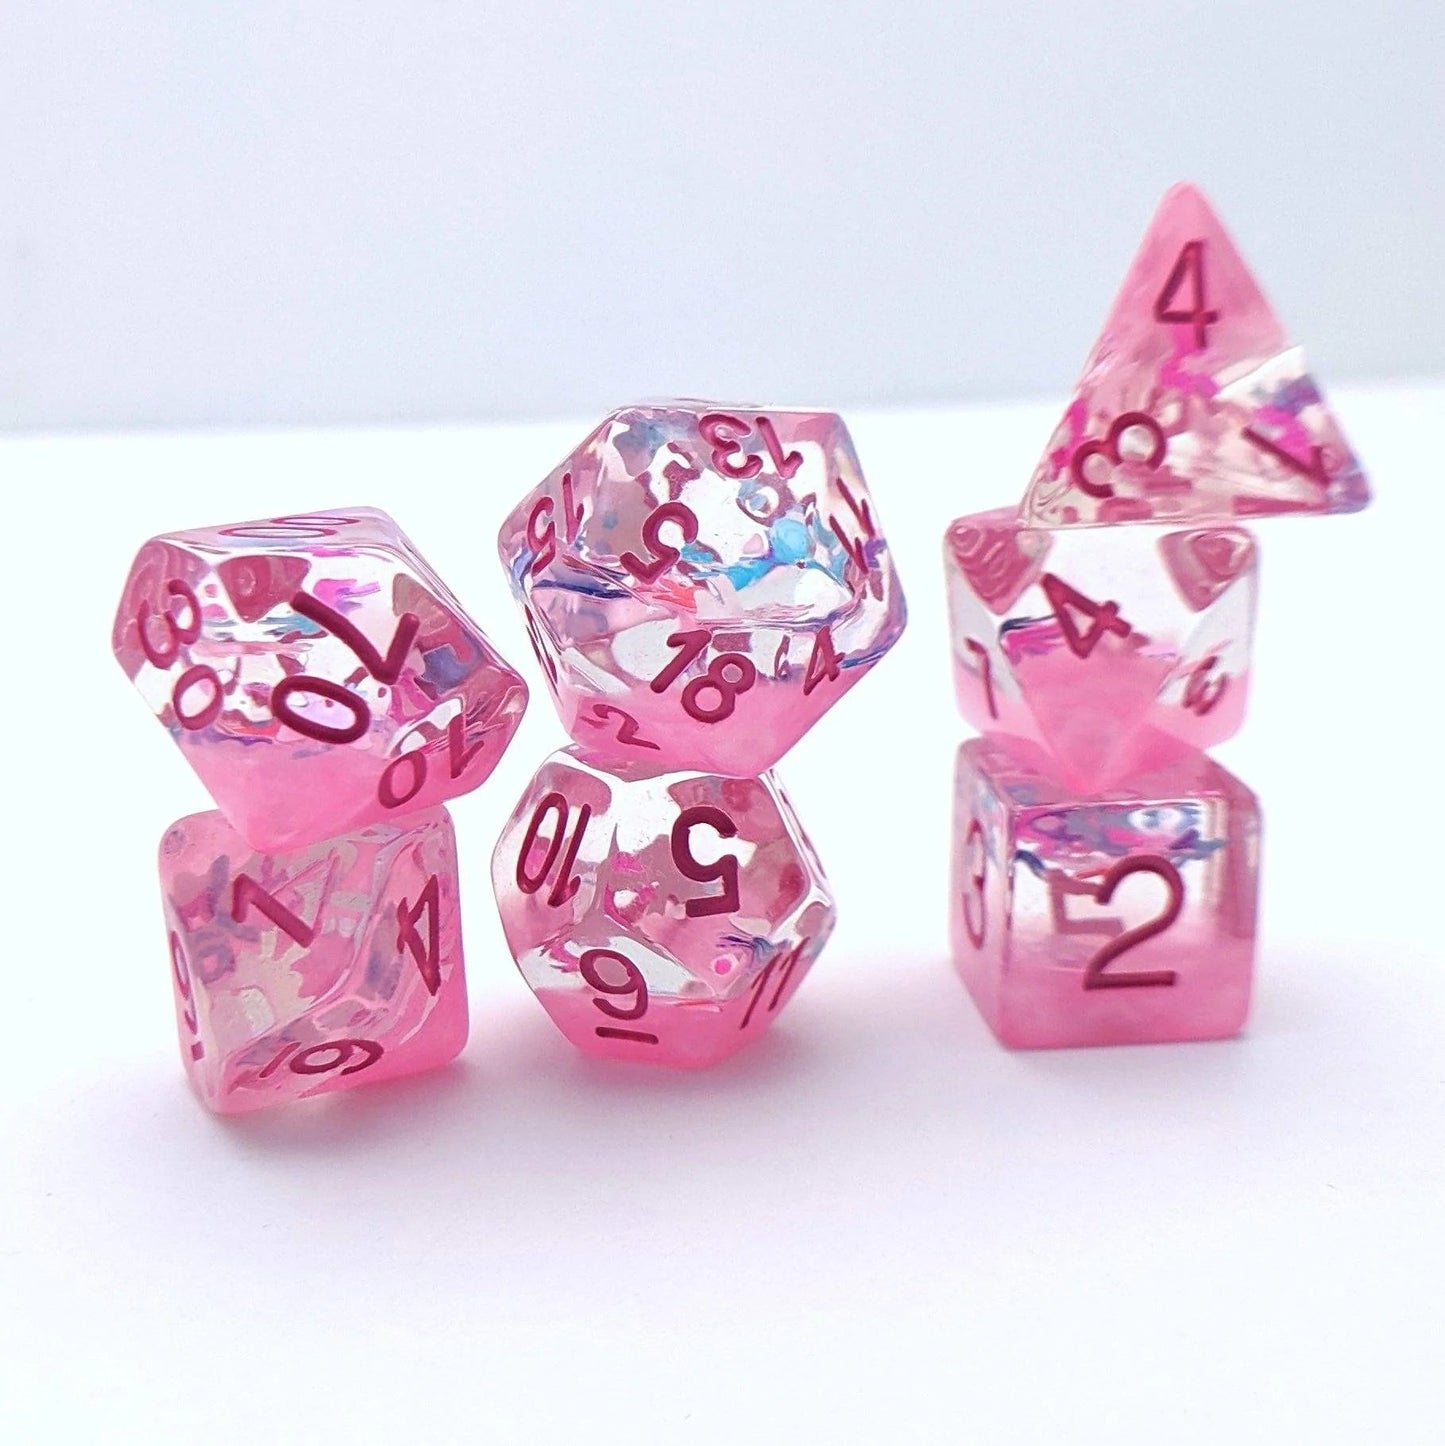 Ribbons and Bows - 7 Dice Set - The Fourth Place